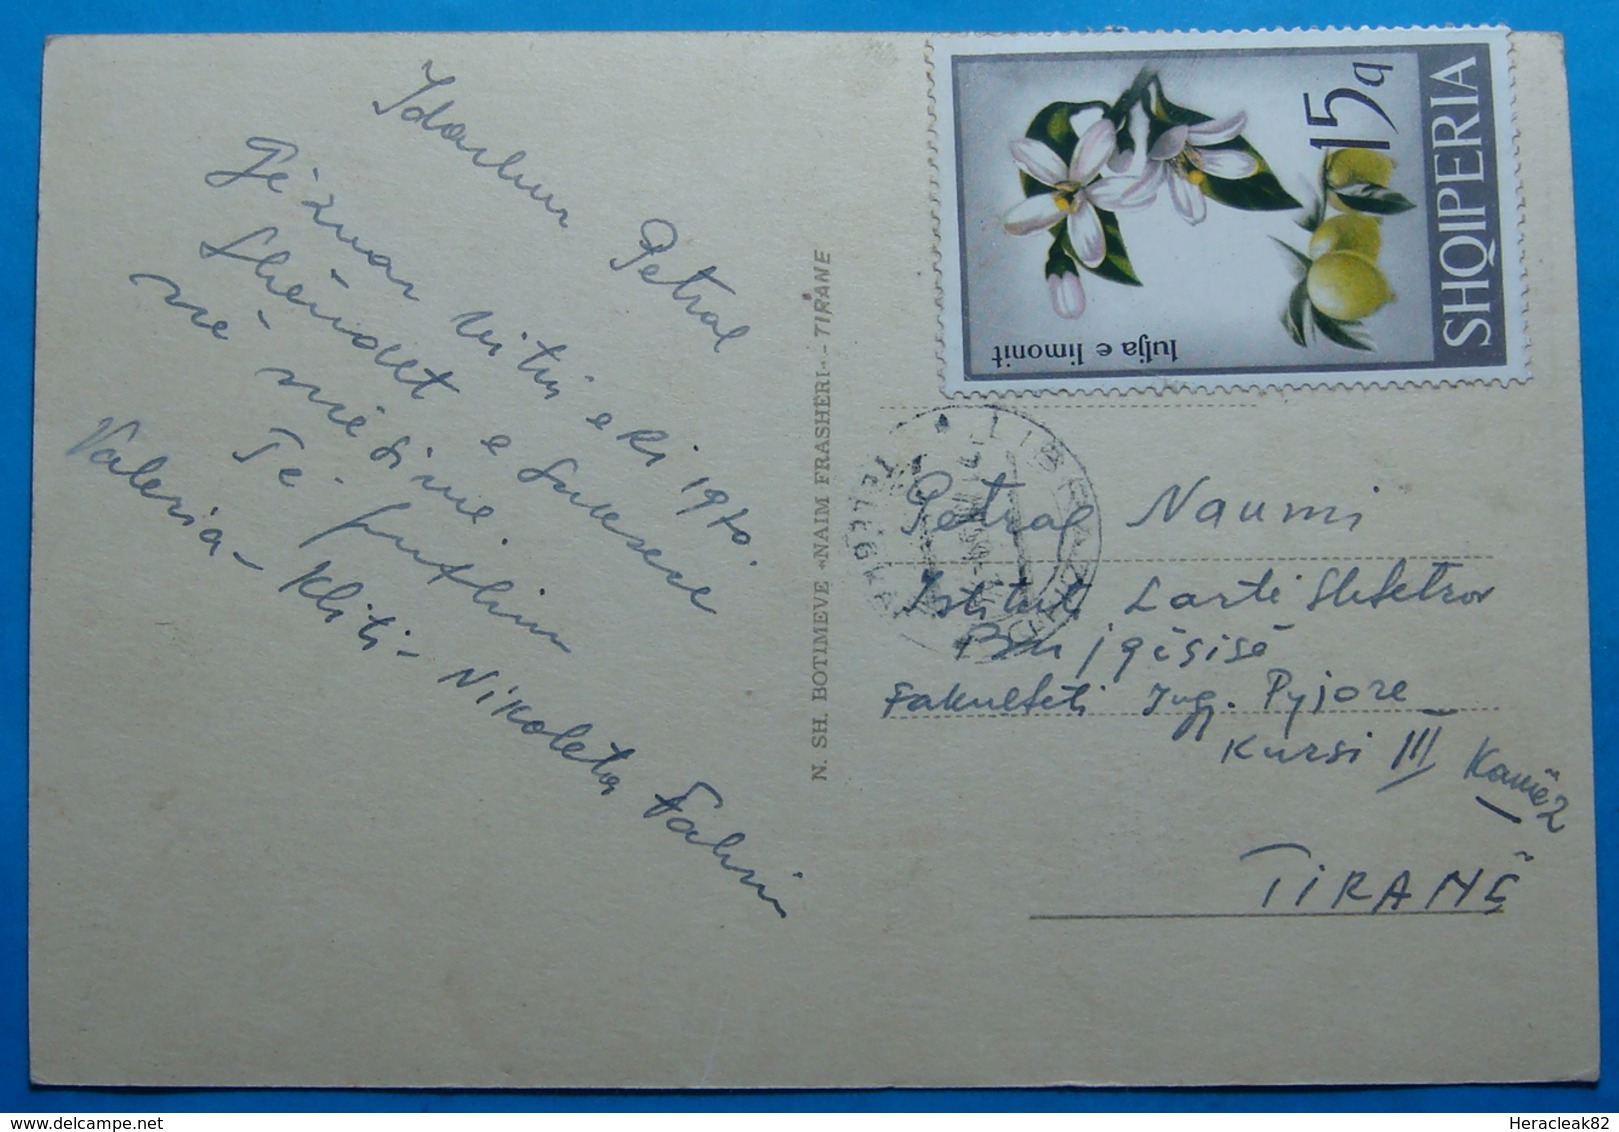 1969 Albania Happy New Year Postcard Sent From Librazhd To Tirana, Seal: LIBRAZHD Stamp 15q. LIME FLOWER - Albania